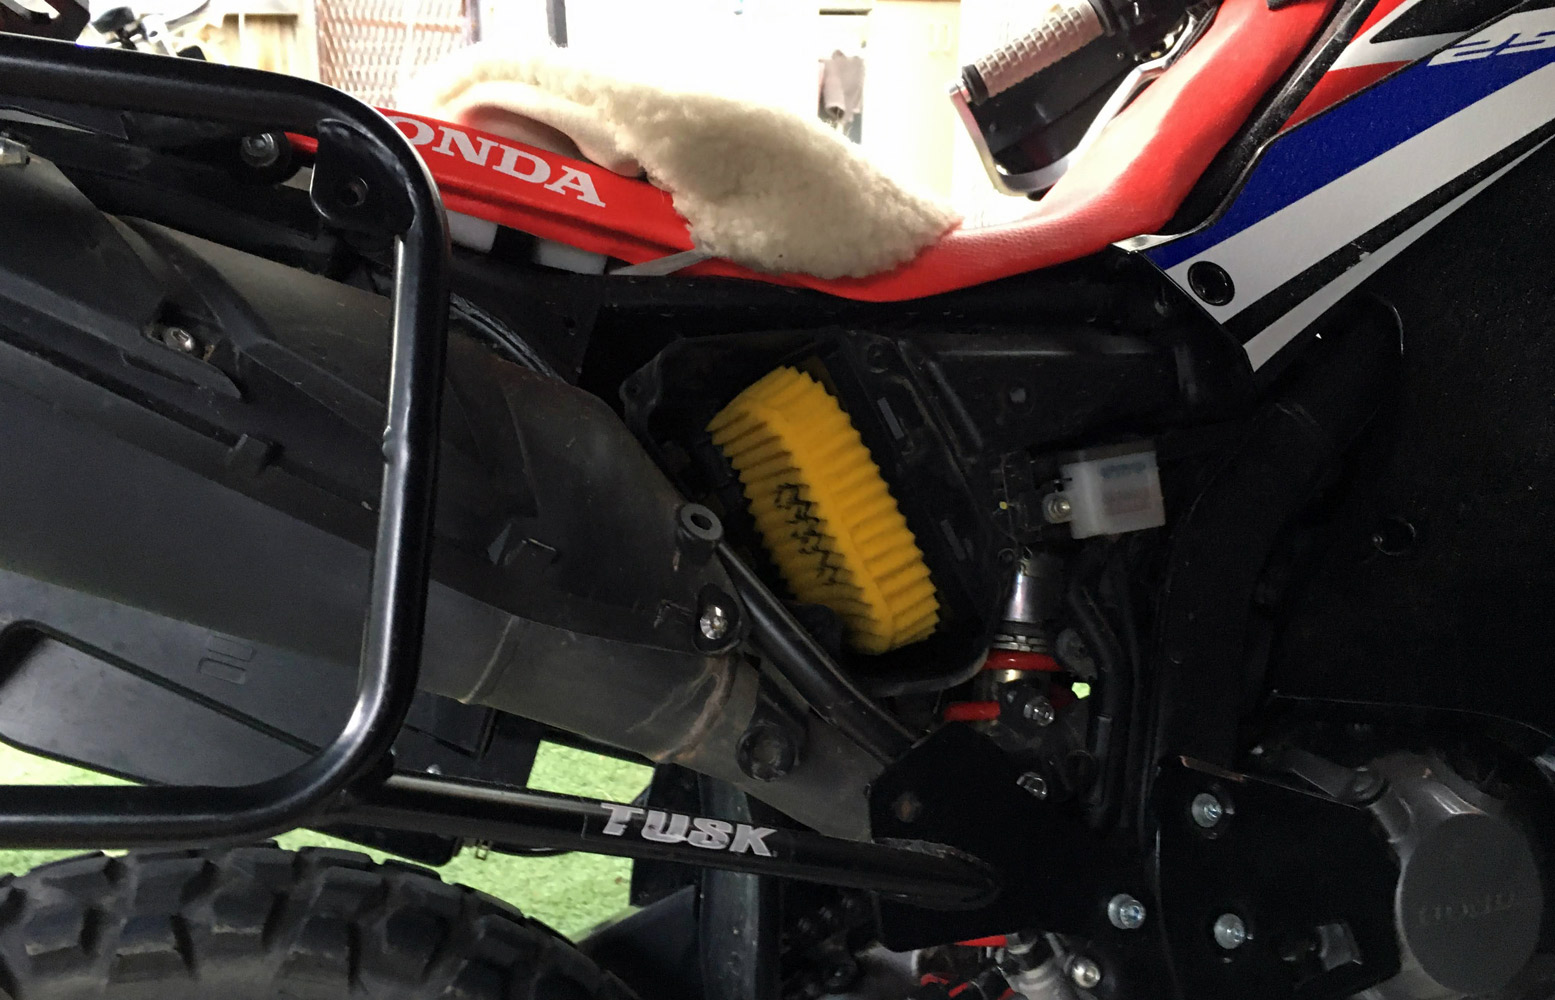 The air filter is accessible by removing the right-hand side middle fairing